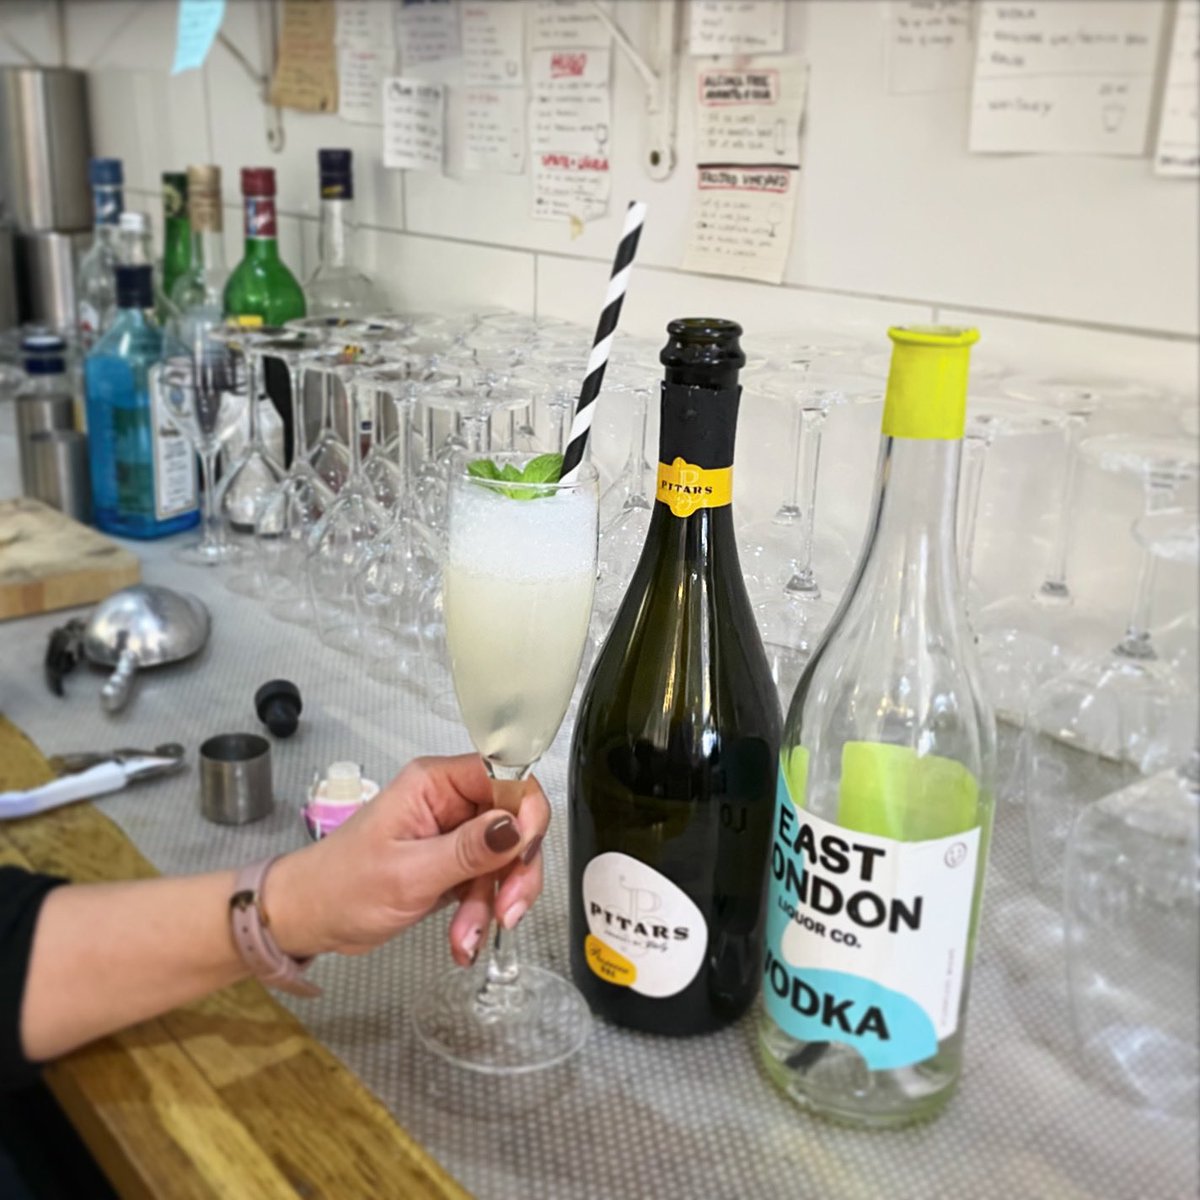 This is the perfect weather for a sgroppino! ☀️ Lemon sorbet, vodka and Prosecco. Heavenly citrusy fizziness in a glass! Have you ever tried it? #sgroppino #leytonstonefood #eatlocal #estitalian #italianflavours #leytonlove #wanstead #forestgate #walthamforesteats